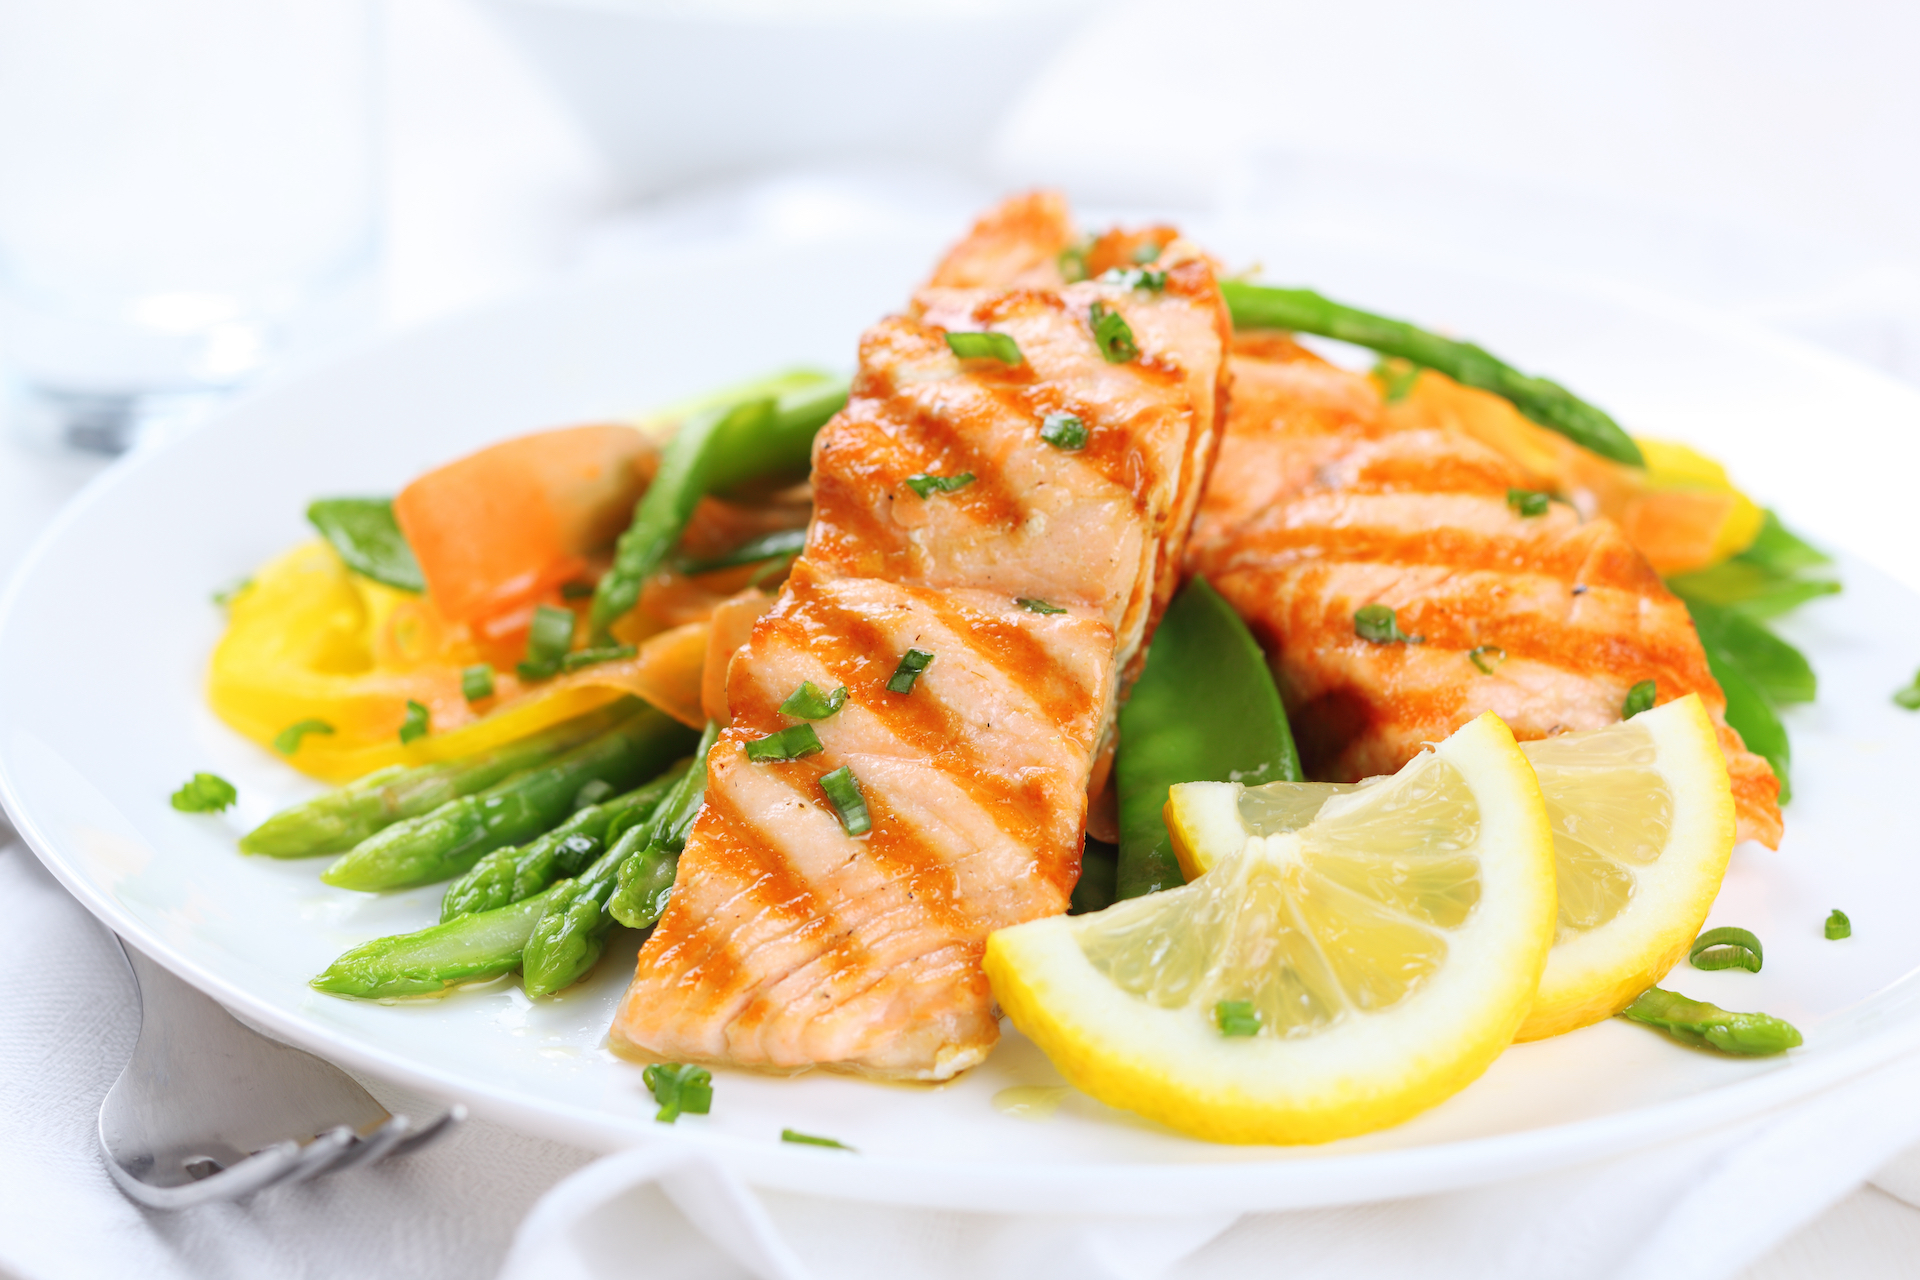 A healthy salmon dish to boost eye health for Splash Tears eye drops to promote healthy living